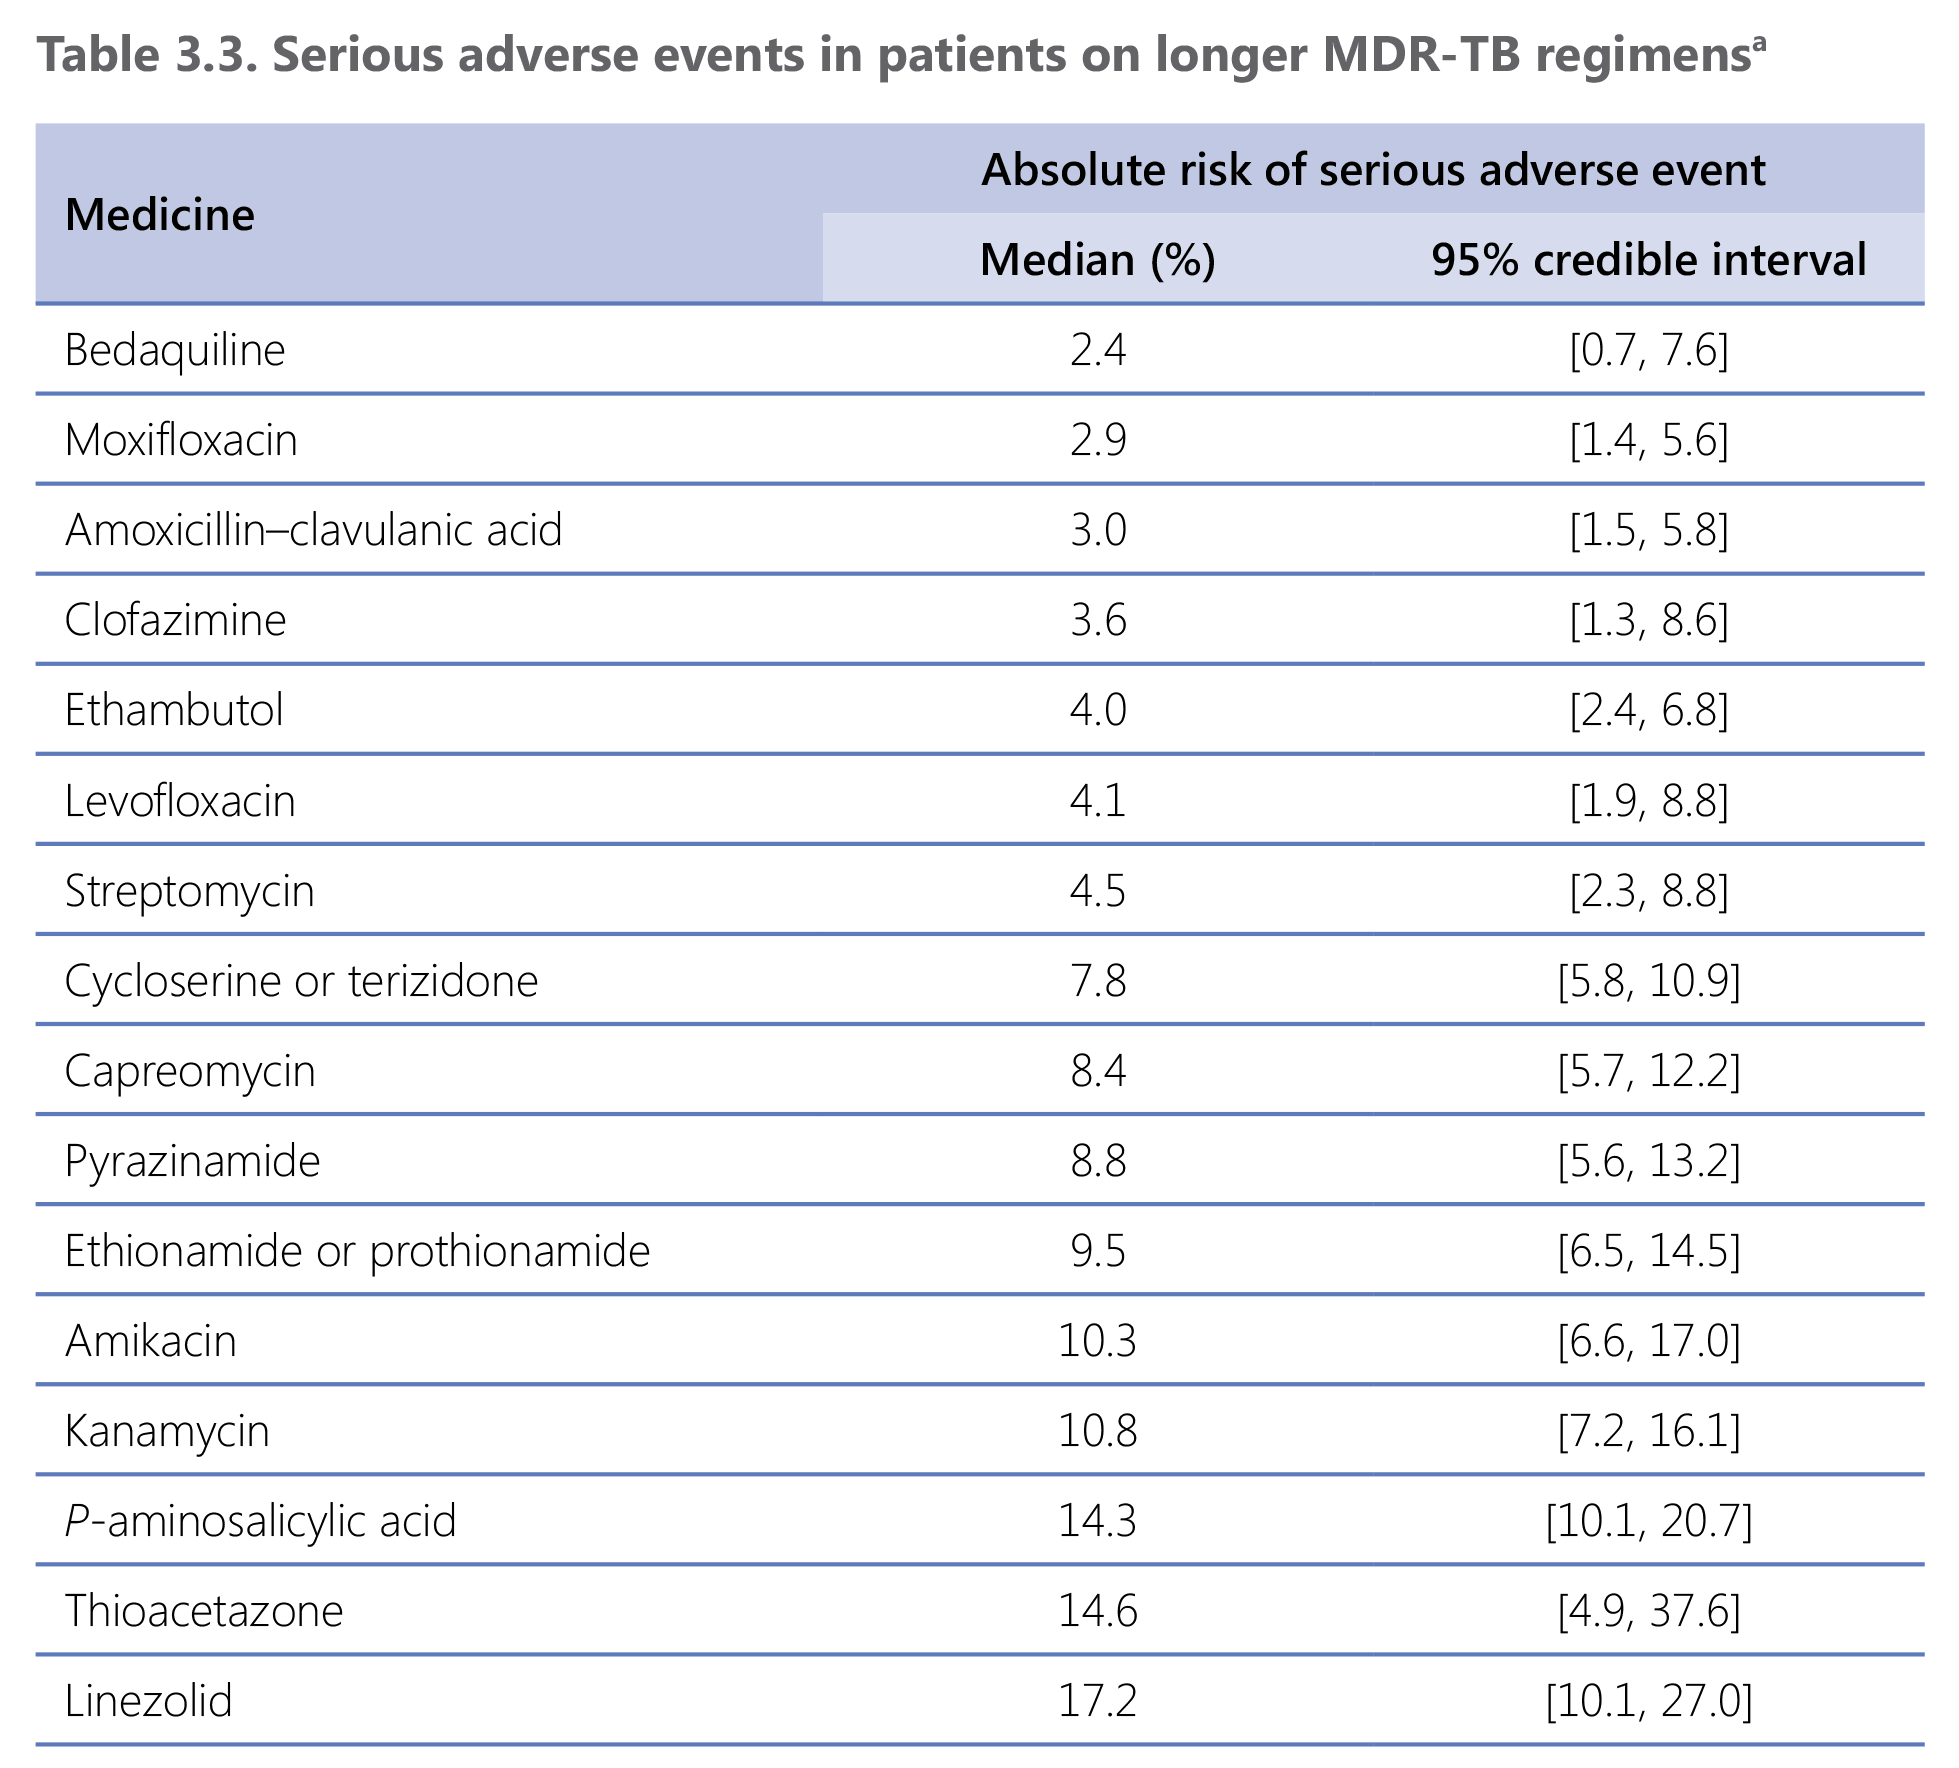 Serious adverse events in patients on longer